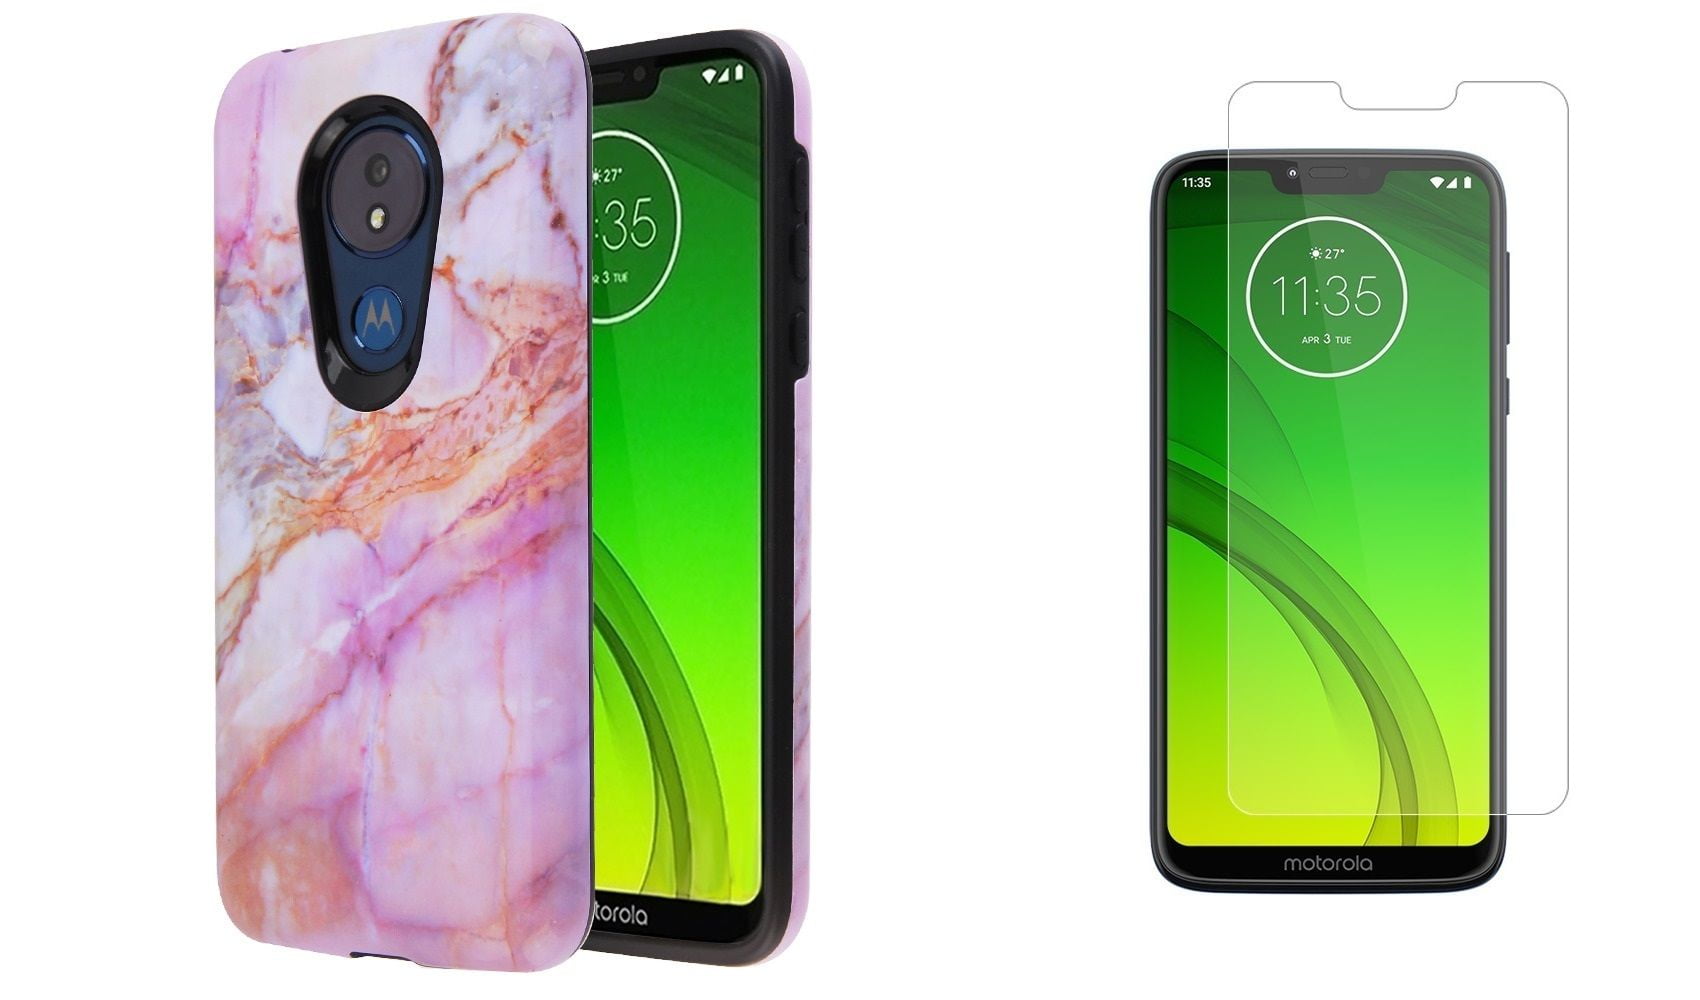 Bemz Fuse Series Compatible with Moto G7 Power, Moto G7 Supra Case Bundle with Dual Hybrid Protection Shield Cover (Purple White Marble), Tempered Glass Screen Protector and Atom Cloth